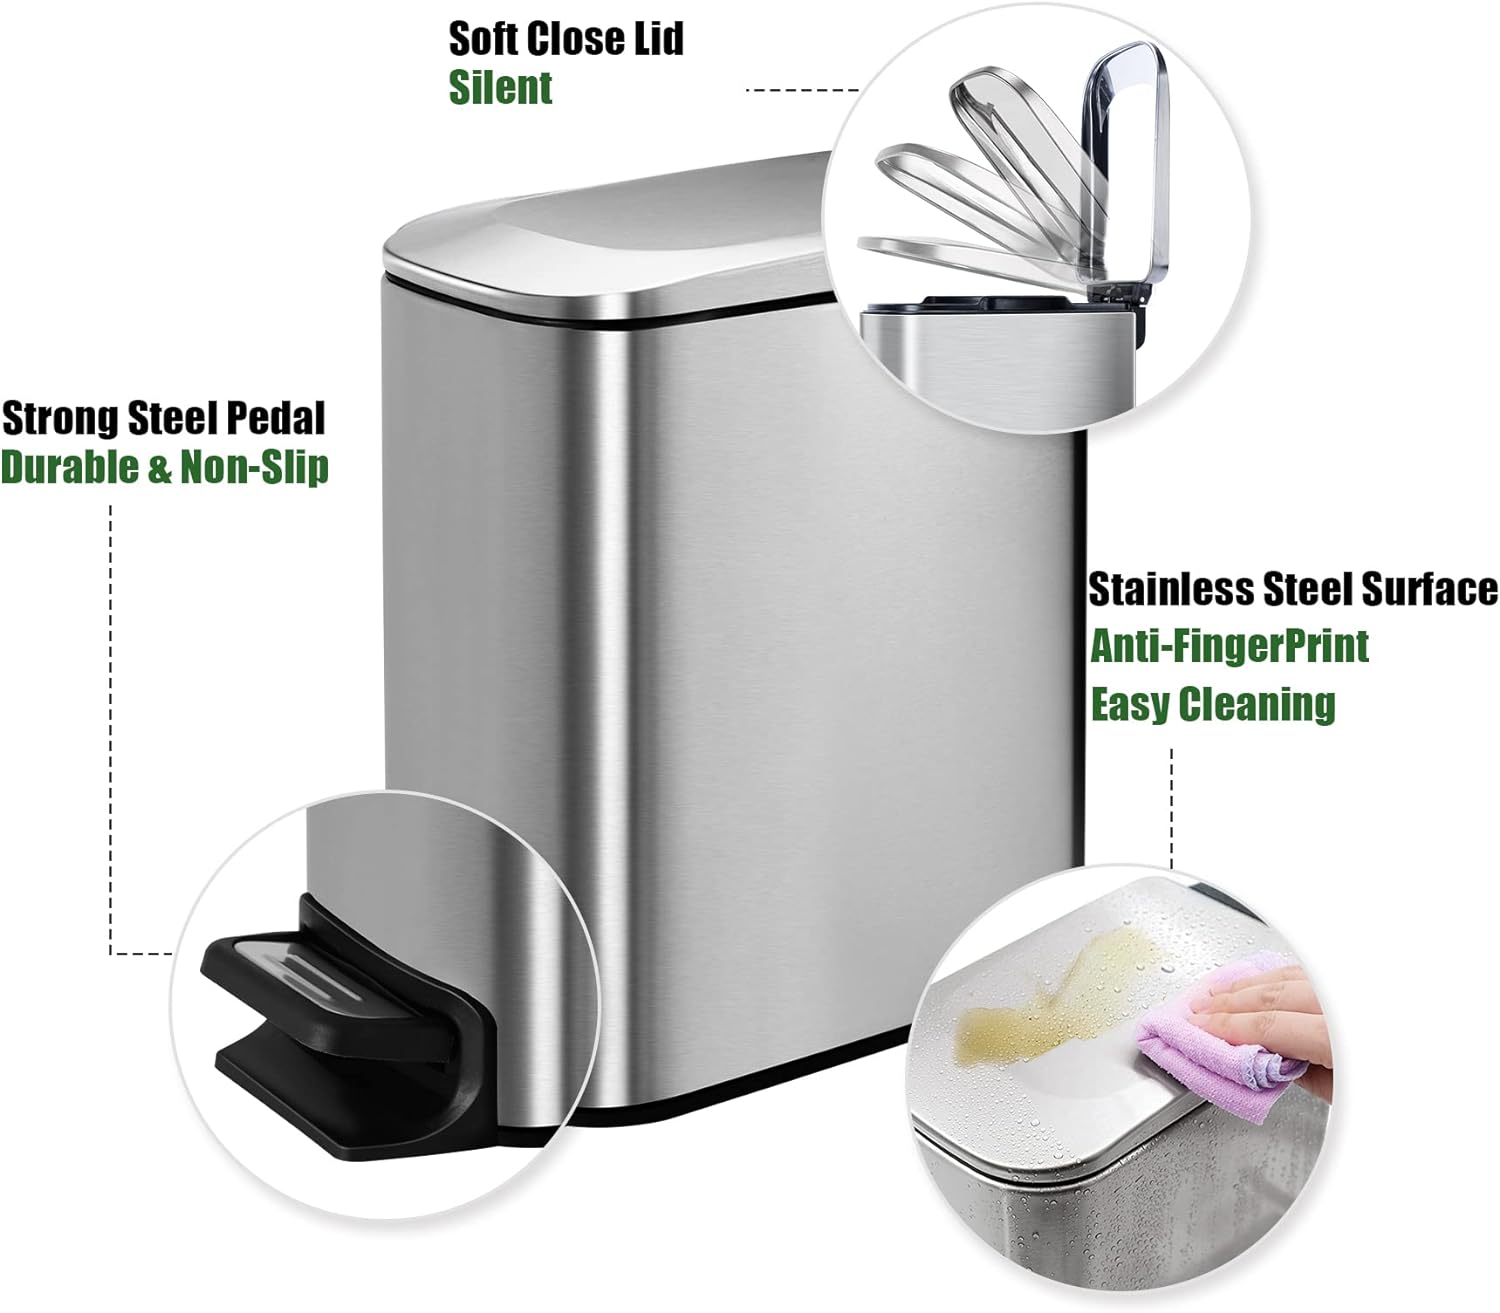 https://bigbigmart.com/wp-content/uploads/2023/10/Cesun-Small-Bathroom-Trash-Can-with-Lid-Soft-Close-Step-Pedal-6-Liter-1.6-Gallon-Stainless-Steel-Garbage-Can-with-Removable-Inner-Bucket-Anti-Fingerprint-Finish-Silver3.jpg